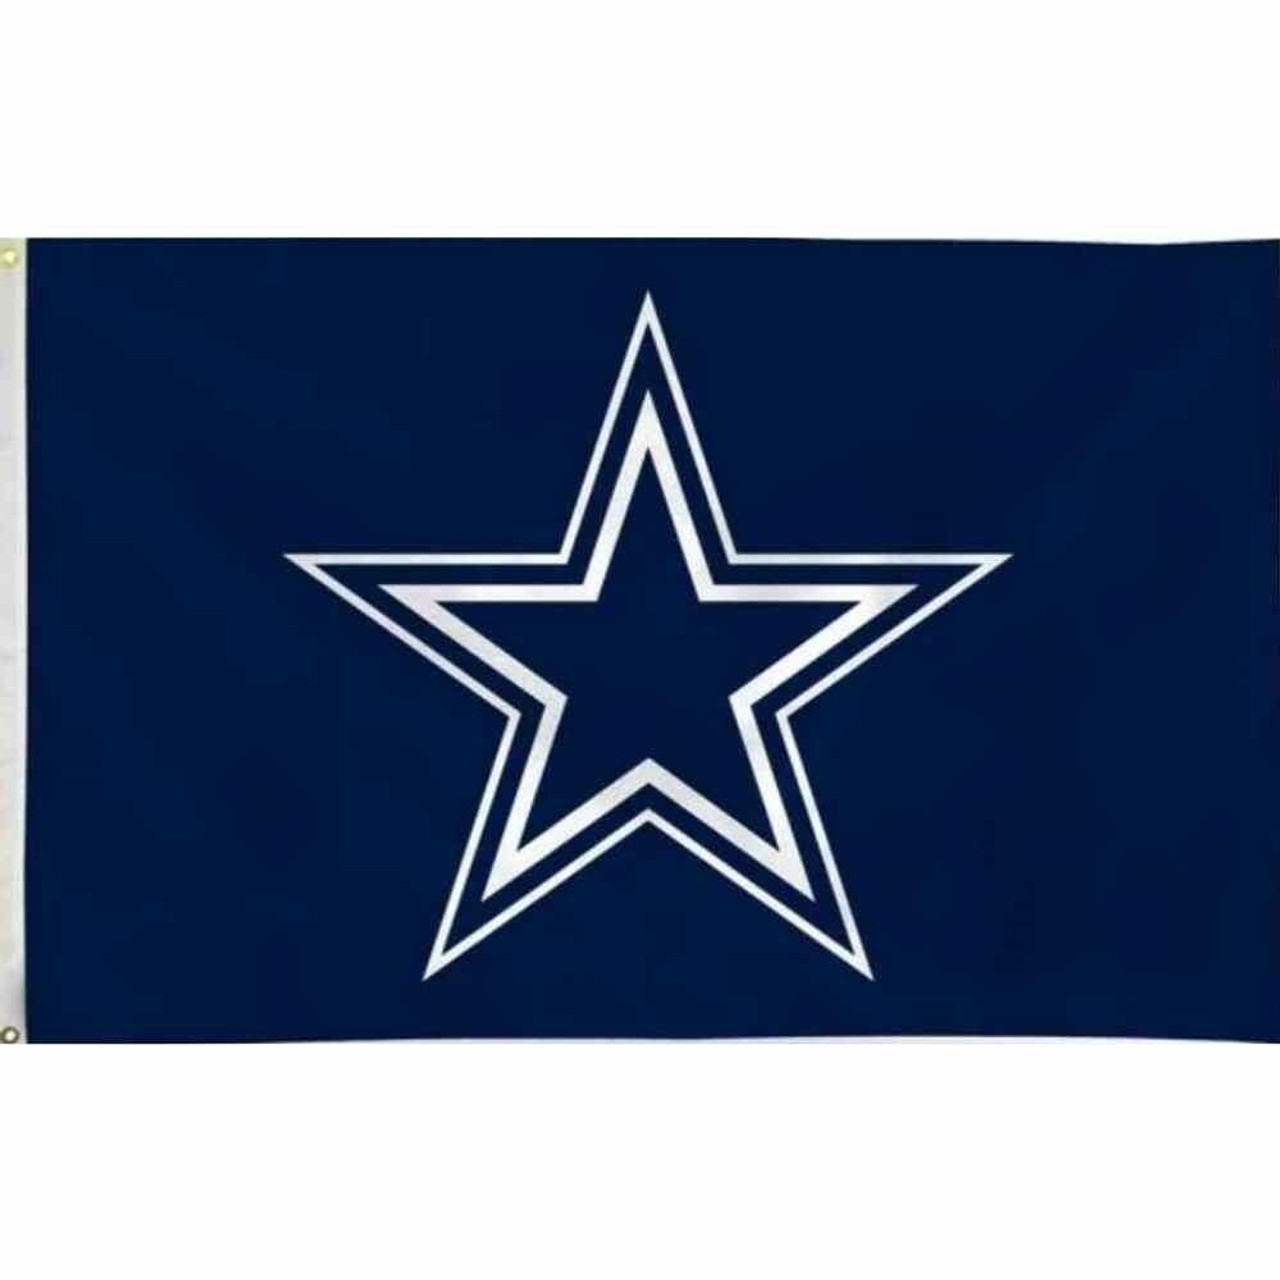 Dallas Cowboys flag has a navy blue background and a white star design centered